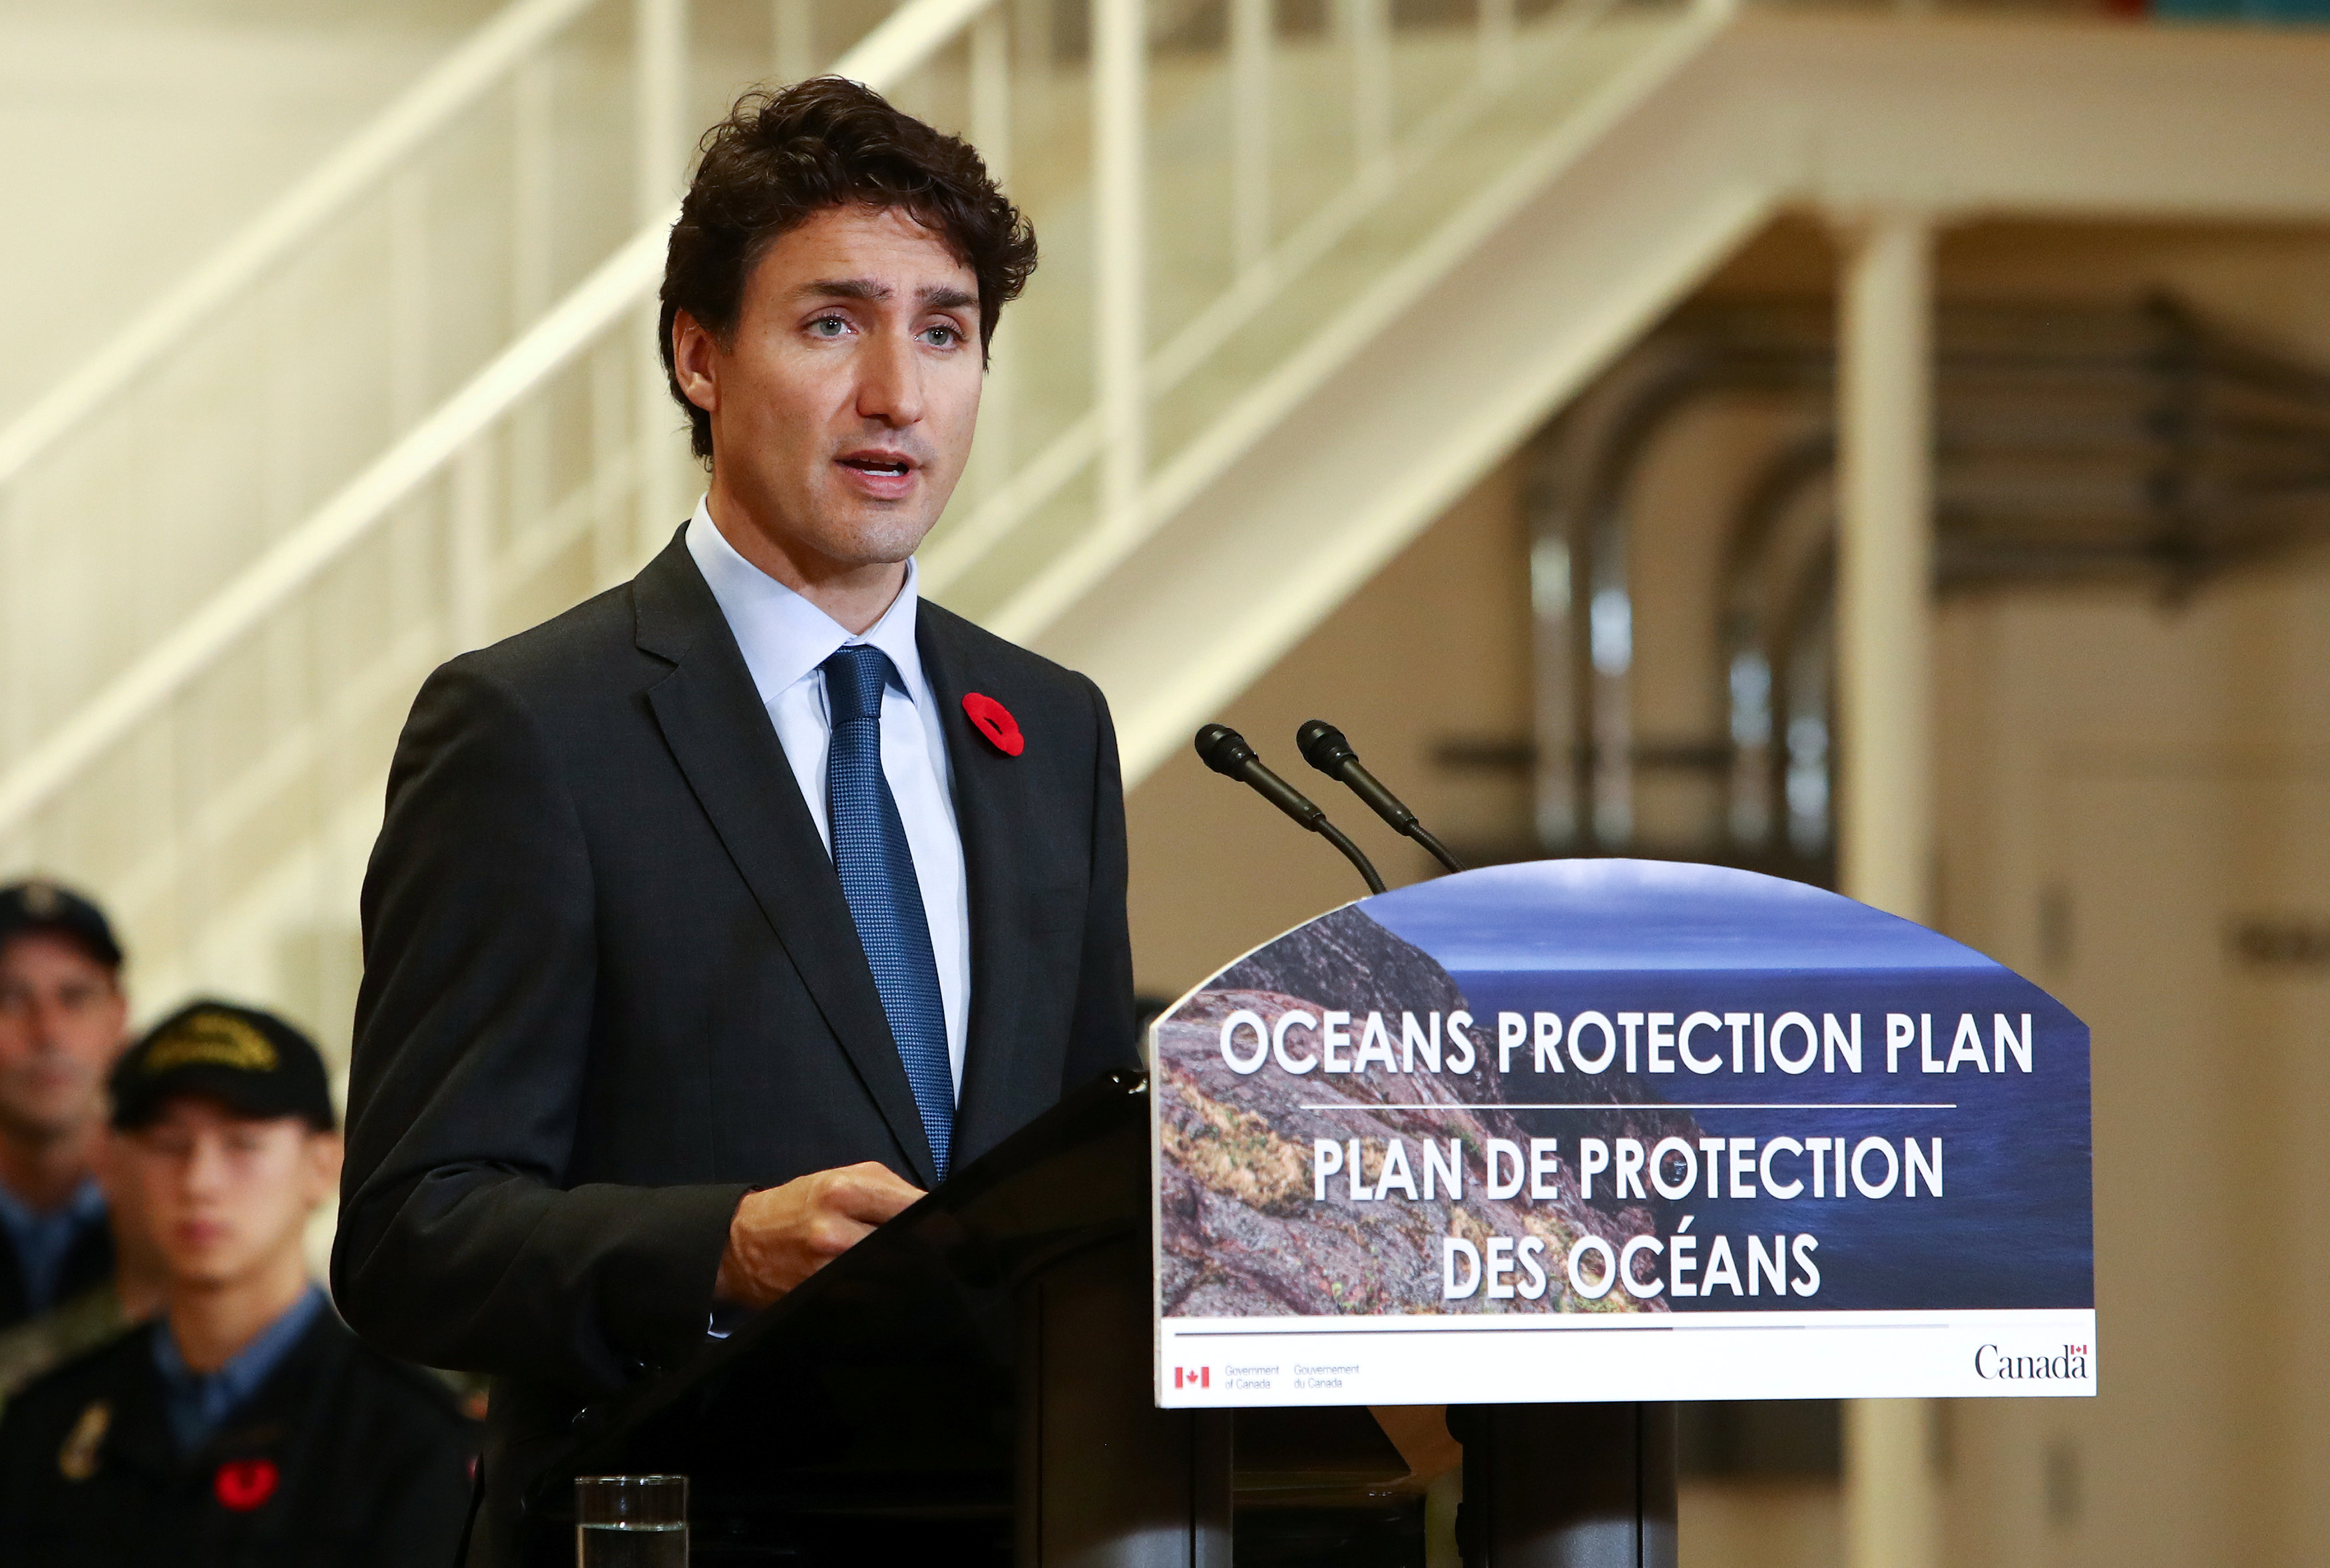 Canada's Prime Minister Justin Trudeau announces a $1.5 billion national Oceans Protection Plan while speaking at HMCS Discovery in Vancouver, B.C., Canada November 7, 2016. (Ben Nelms / Reuters)